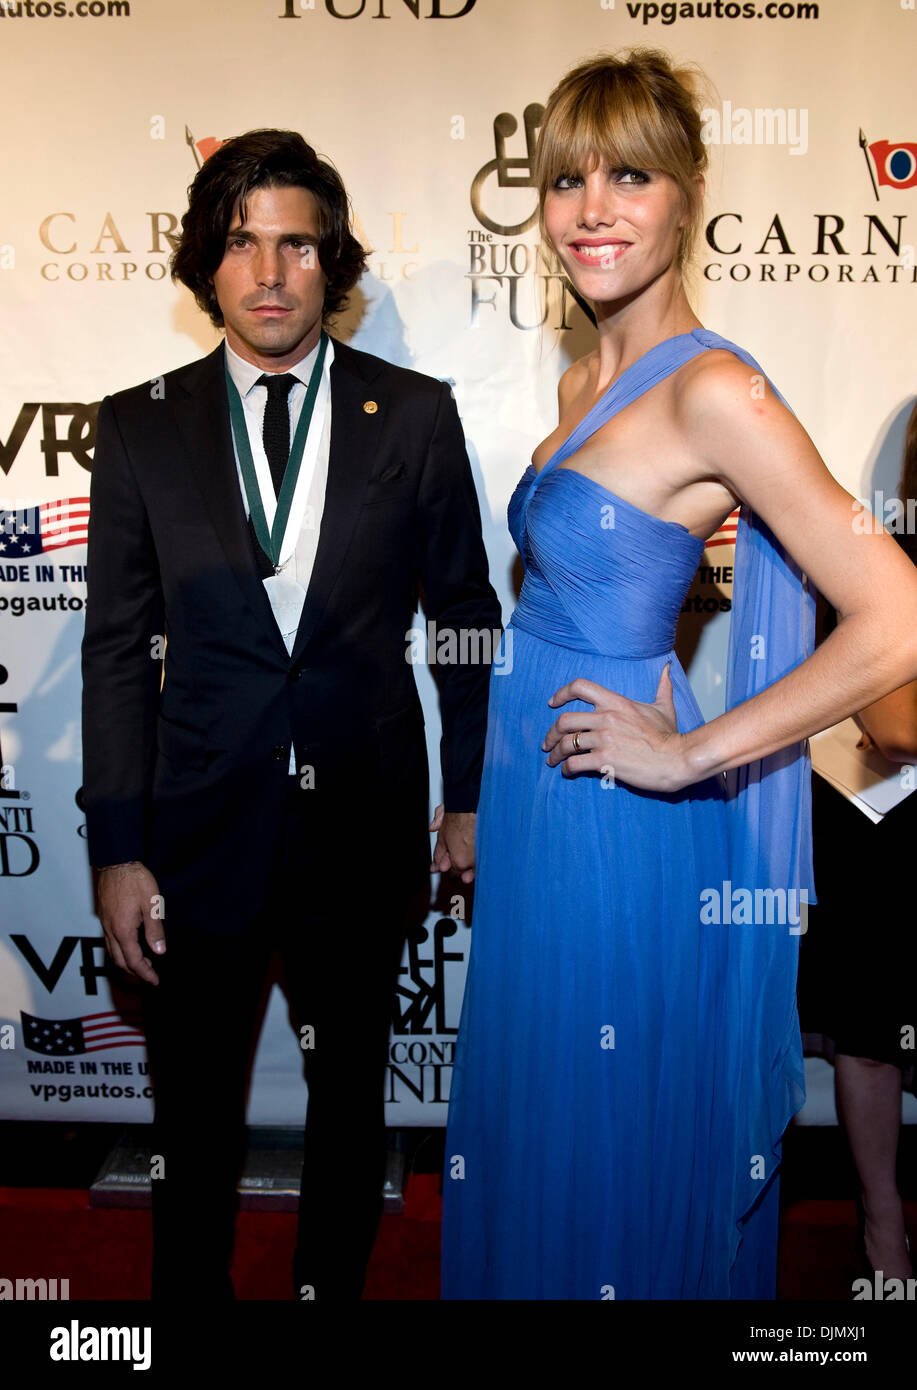 Sept. 27, 2010 - New York, NY, USA - IGNACIO ''NACHO'' FIGUERAS and DELPHINE FIGUERAS at the 25th Annual Great Sports Lends Dinner, which benefits the Buoniconti Fund to Cure Paralysis, at the Waldorf Astoria Hotel.  This year's honorees are Willie Mays, Bill Russell, Michael Irvin, Dan Marino, Annika Sorenstam, Brian Leetch, Ignacio ''Nacho'' Figueras, Laird Hamilton and Calvin Bo Stock Photo